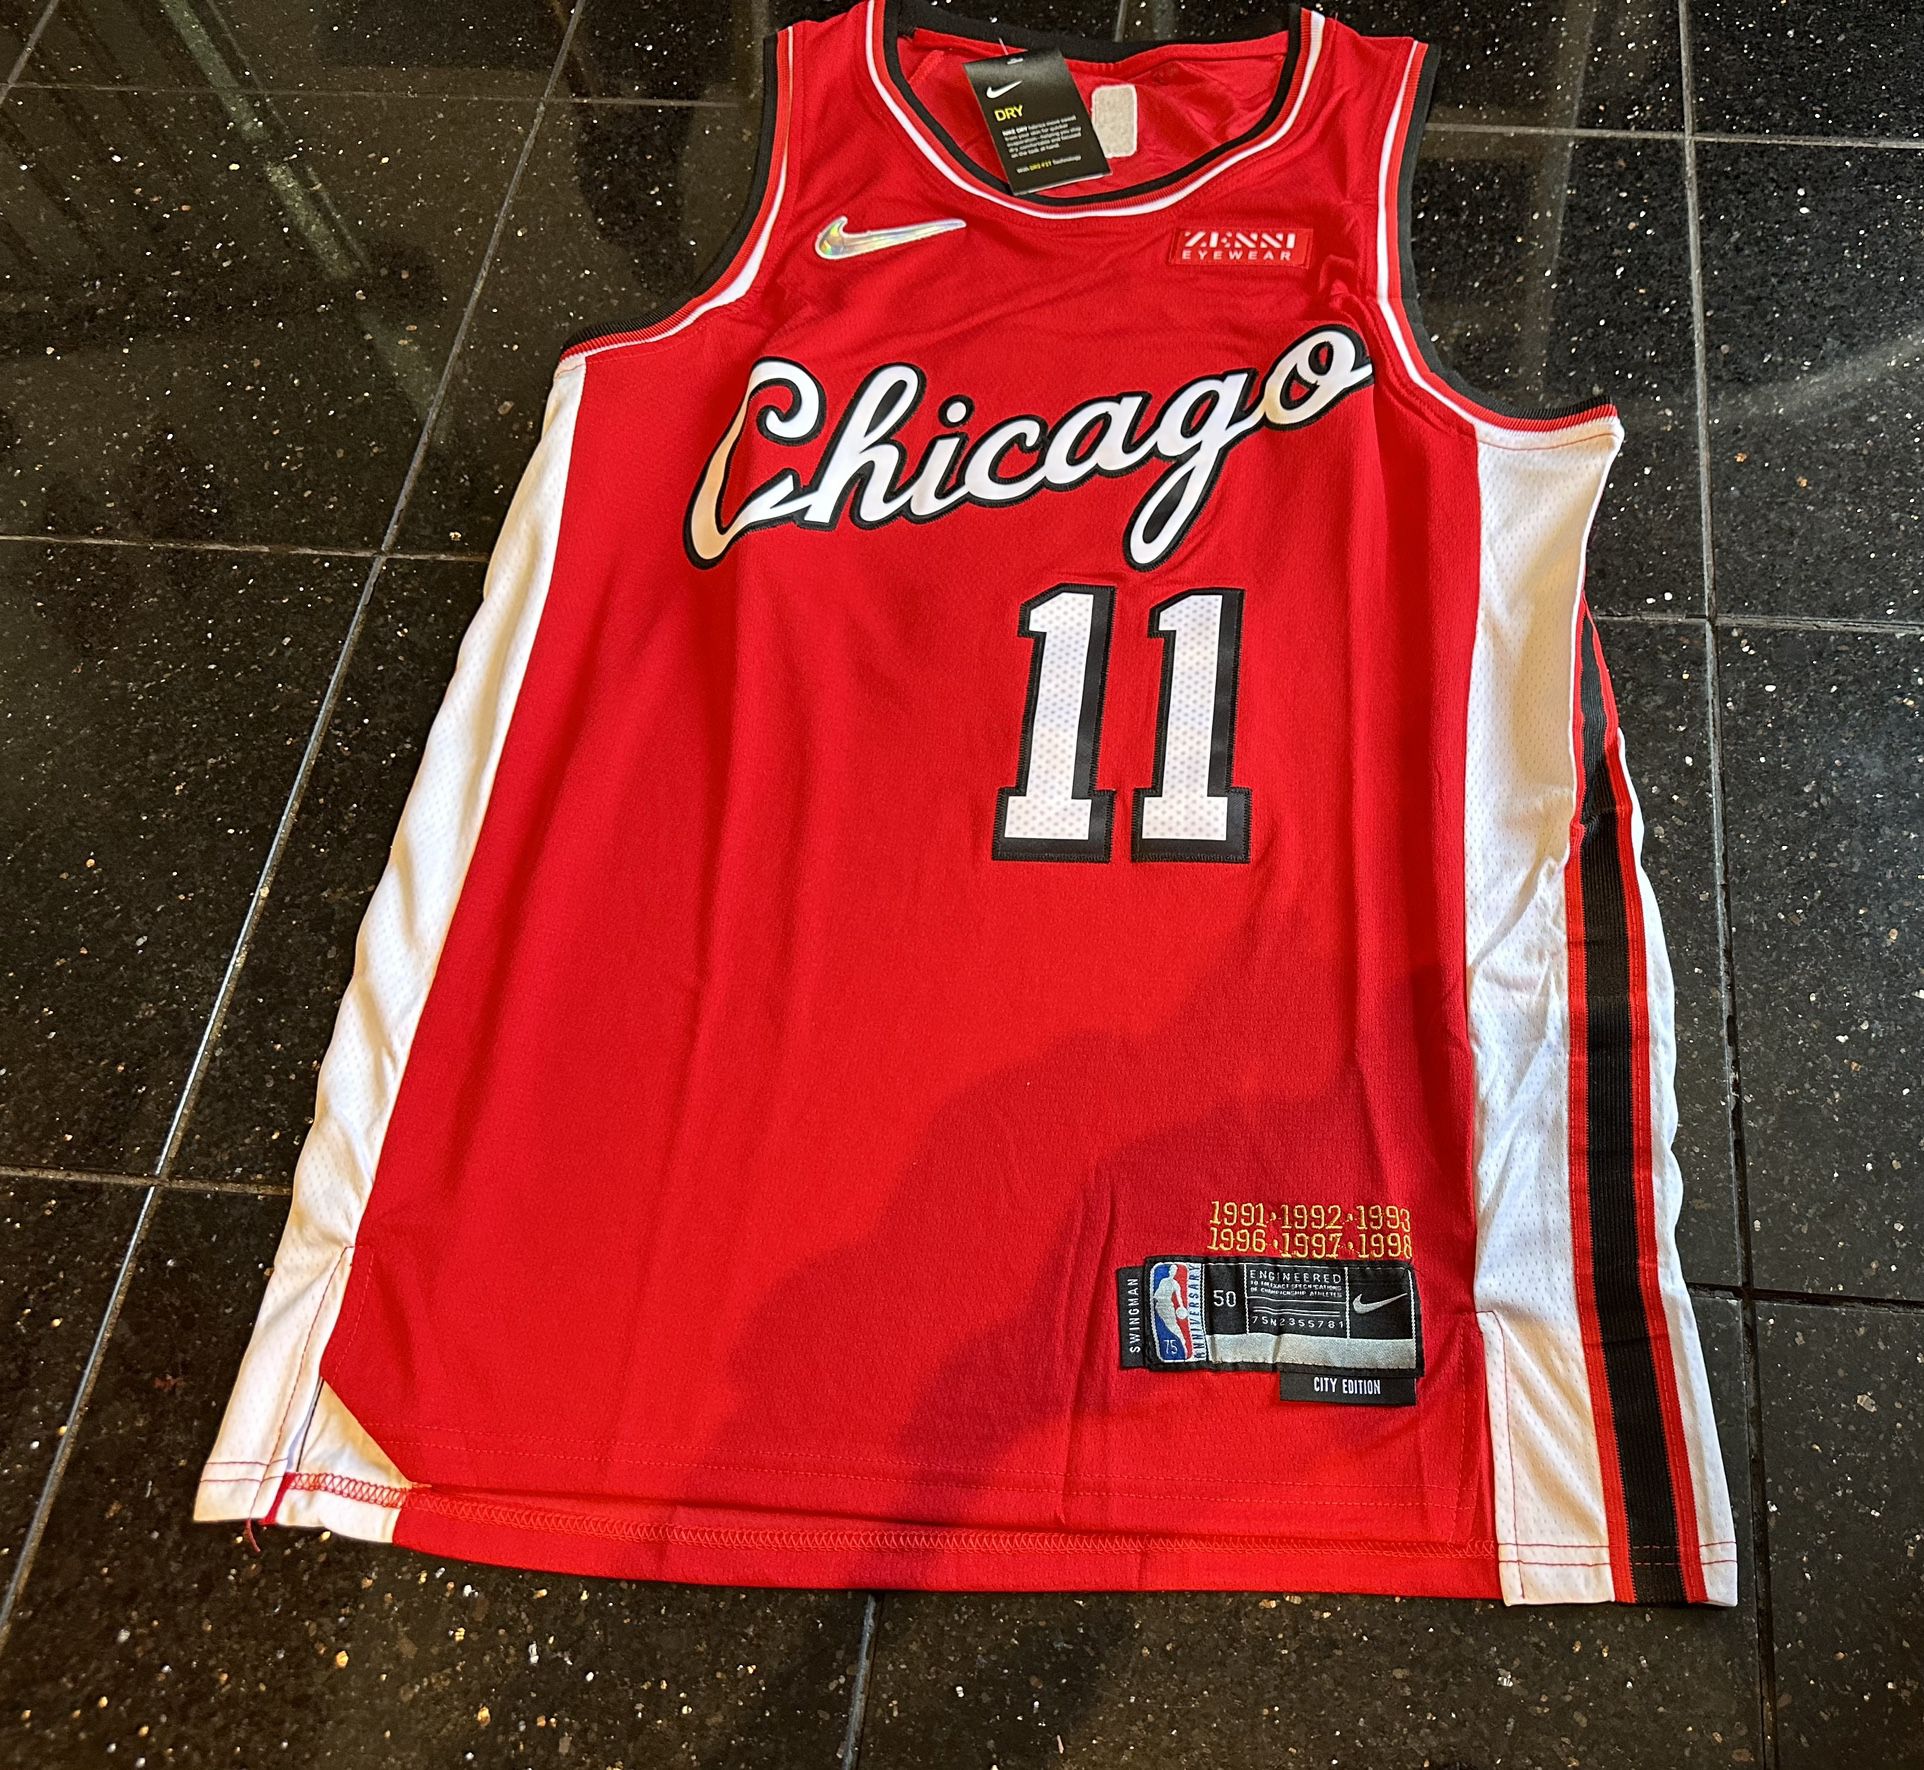 Chicago Bulls City Edition Jerseys for Sale in Orland Park, IL - OfferUp